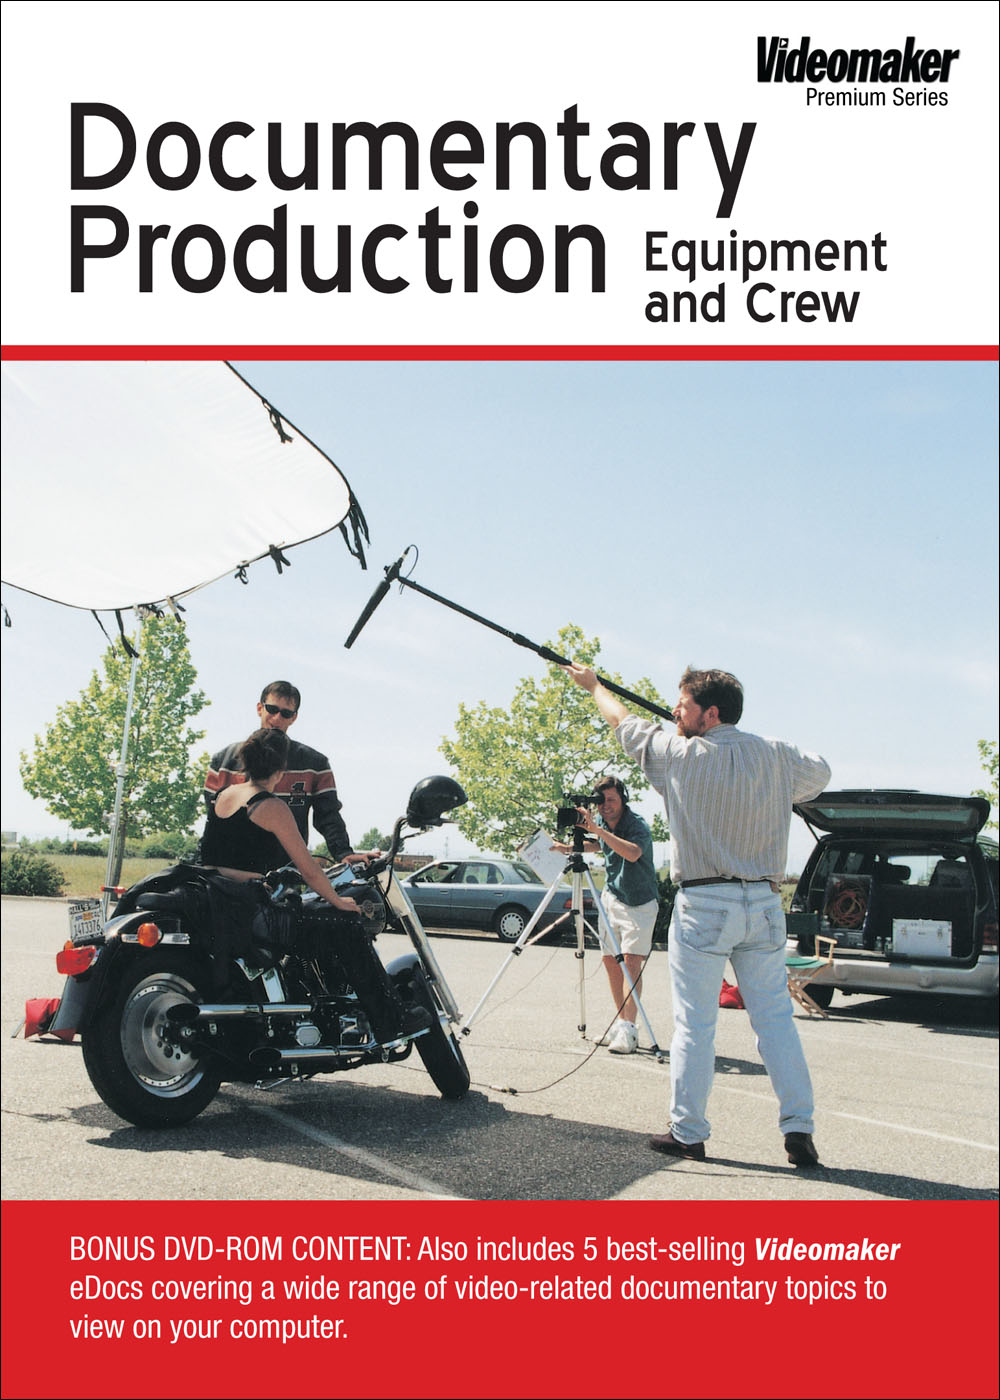 F828 - Documentary Production Equipment and Crew